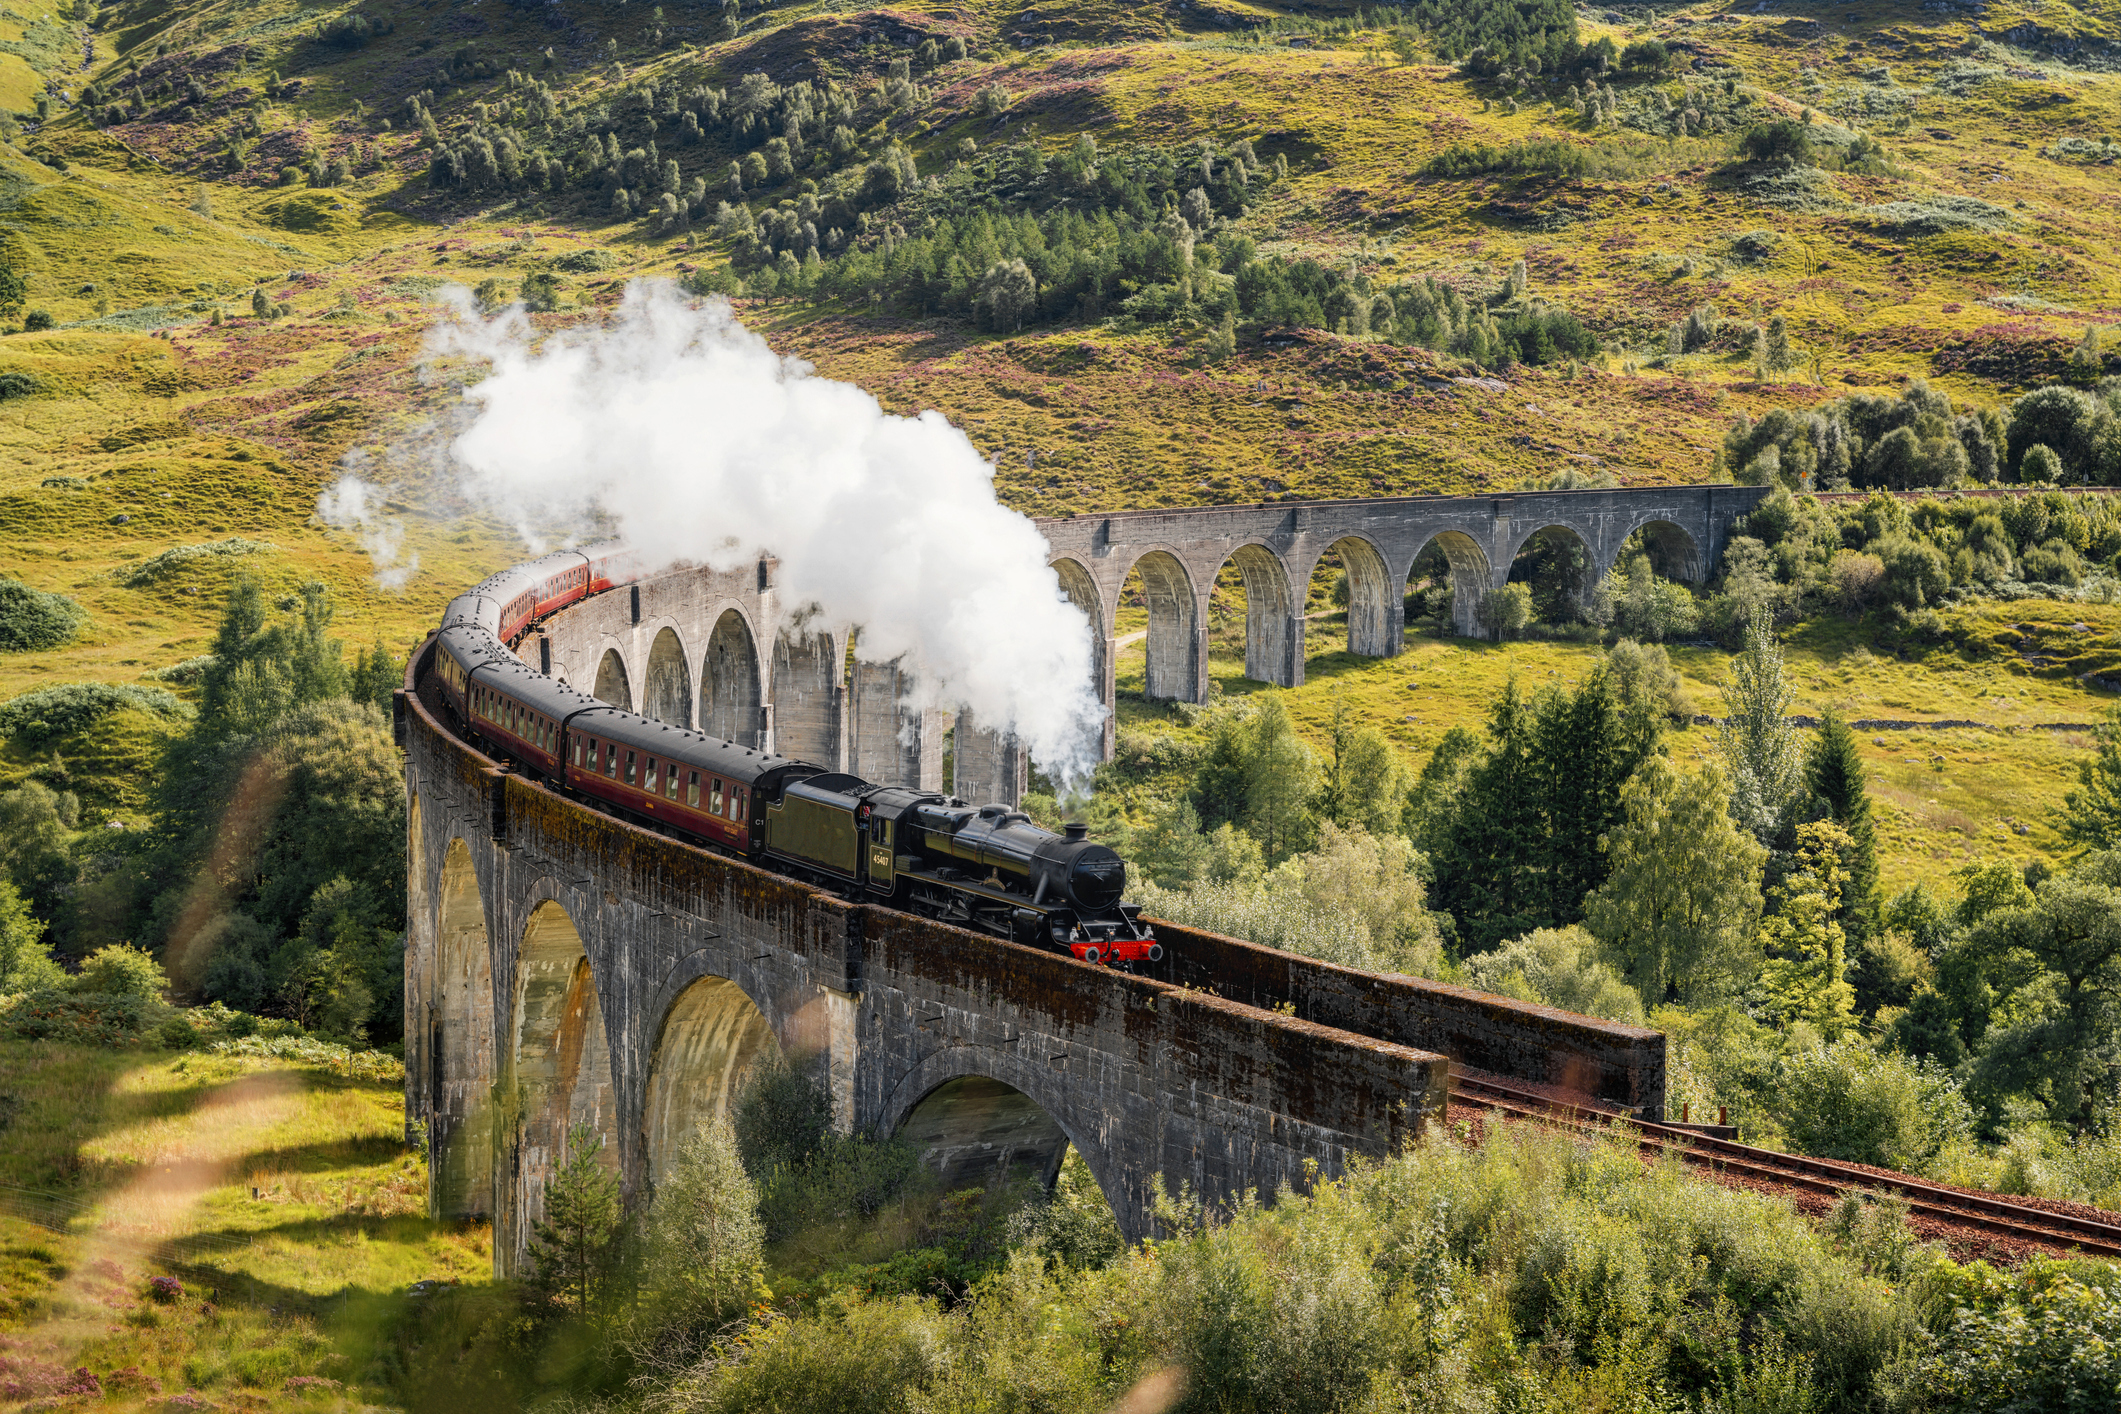 Glenfinnan Viaduct features in the Harry Potter films